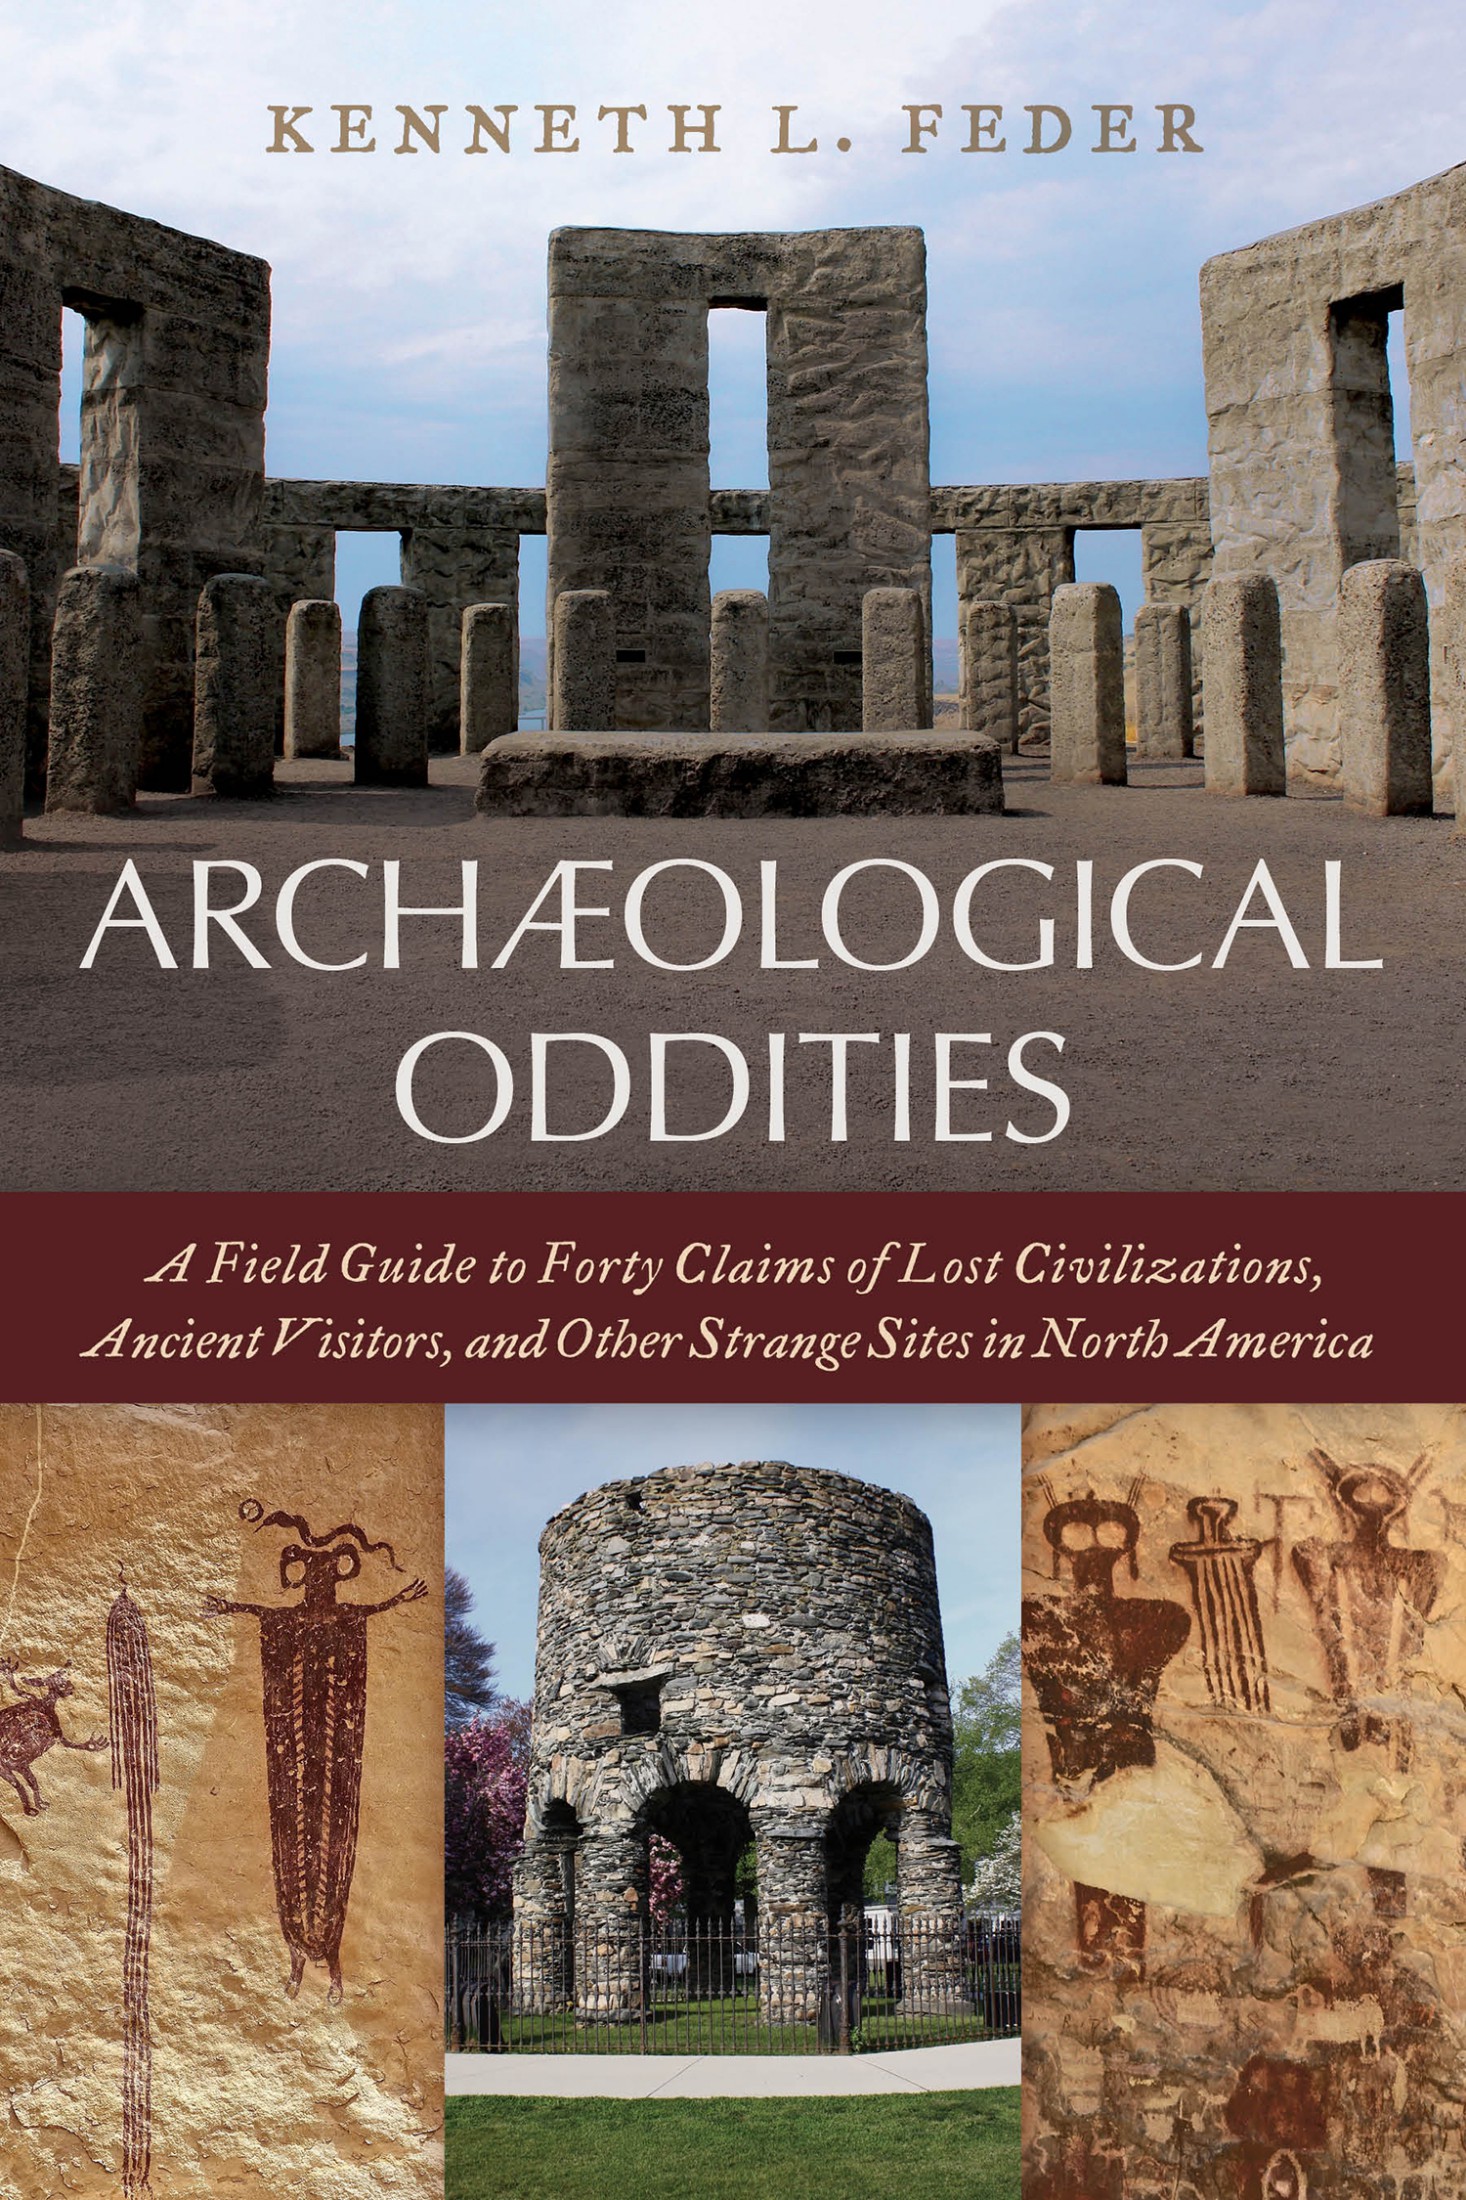 Archaeological Oddities: A Field Guide to Forty Claims of Lost